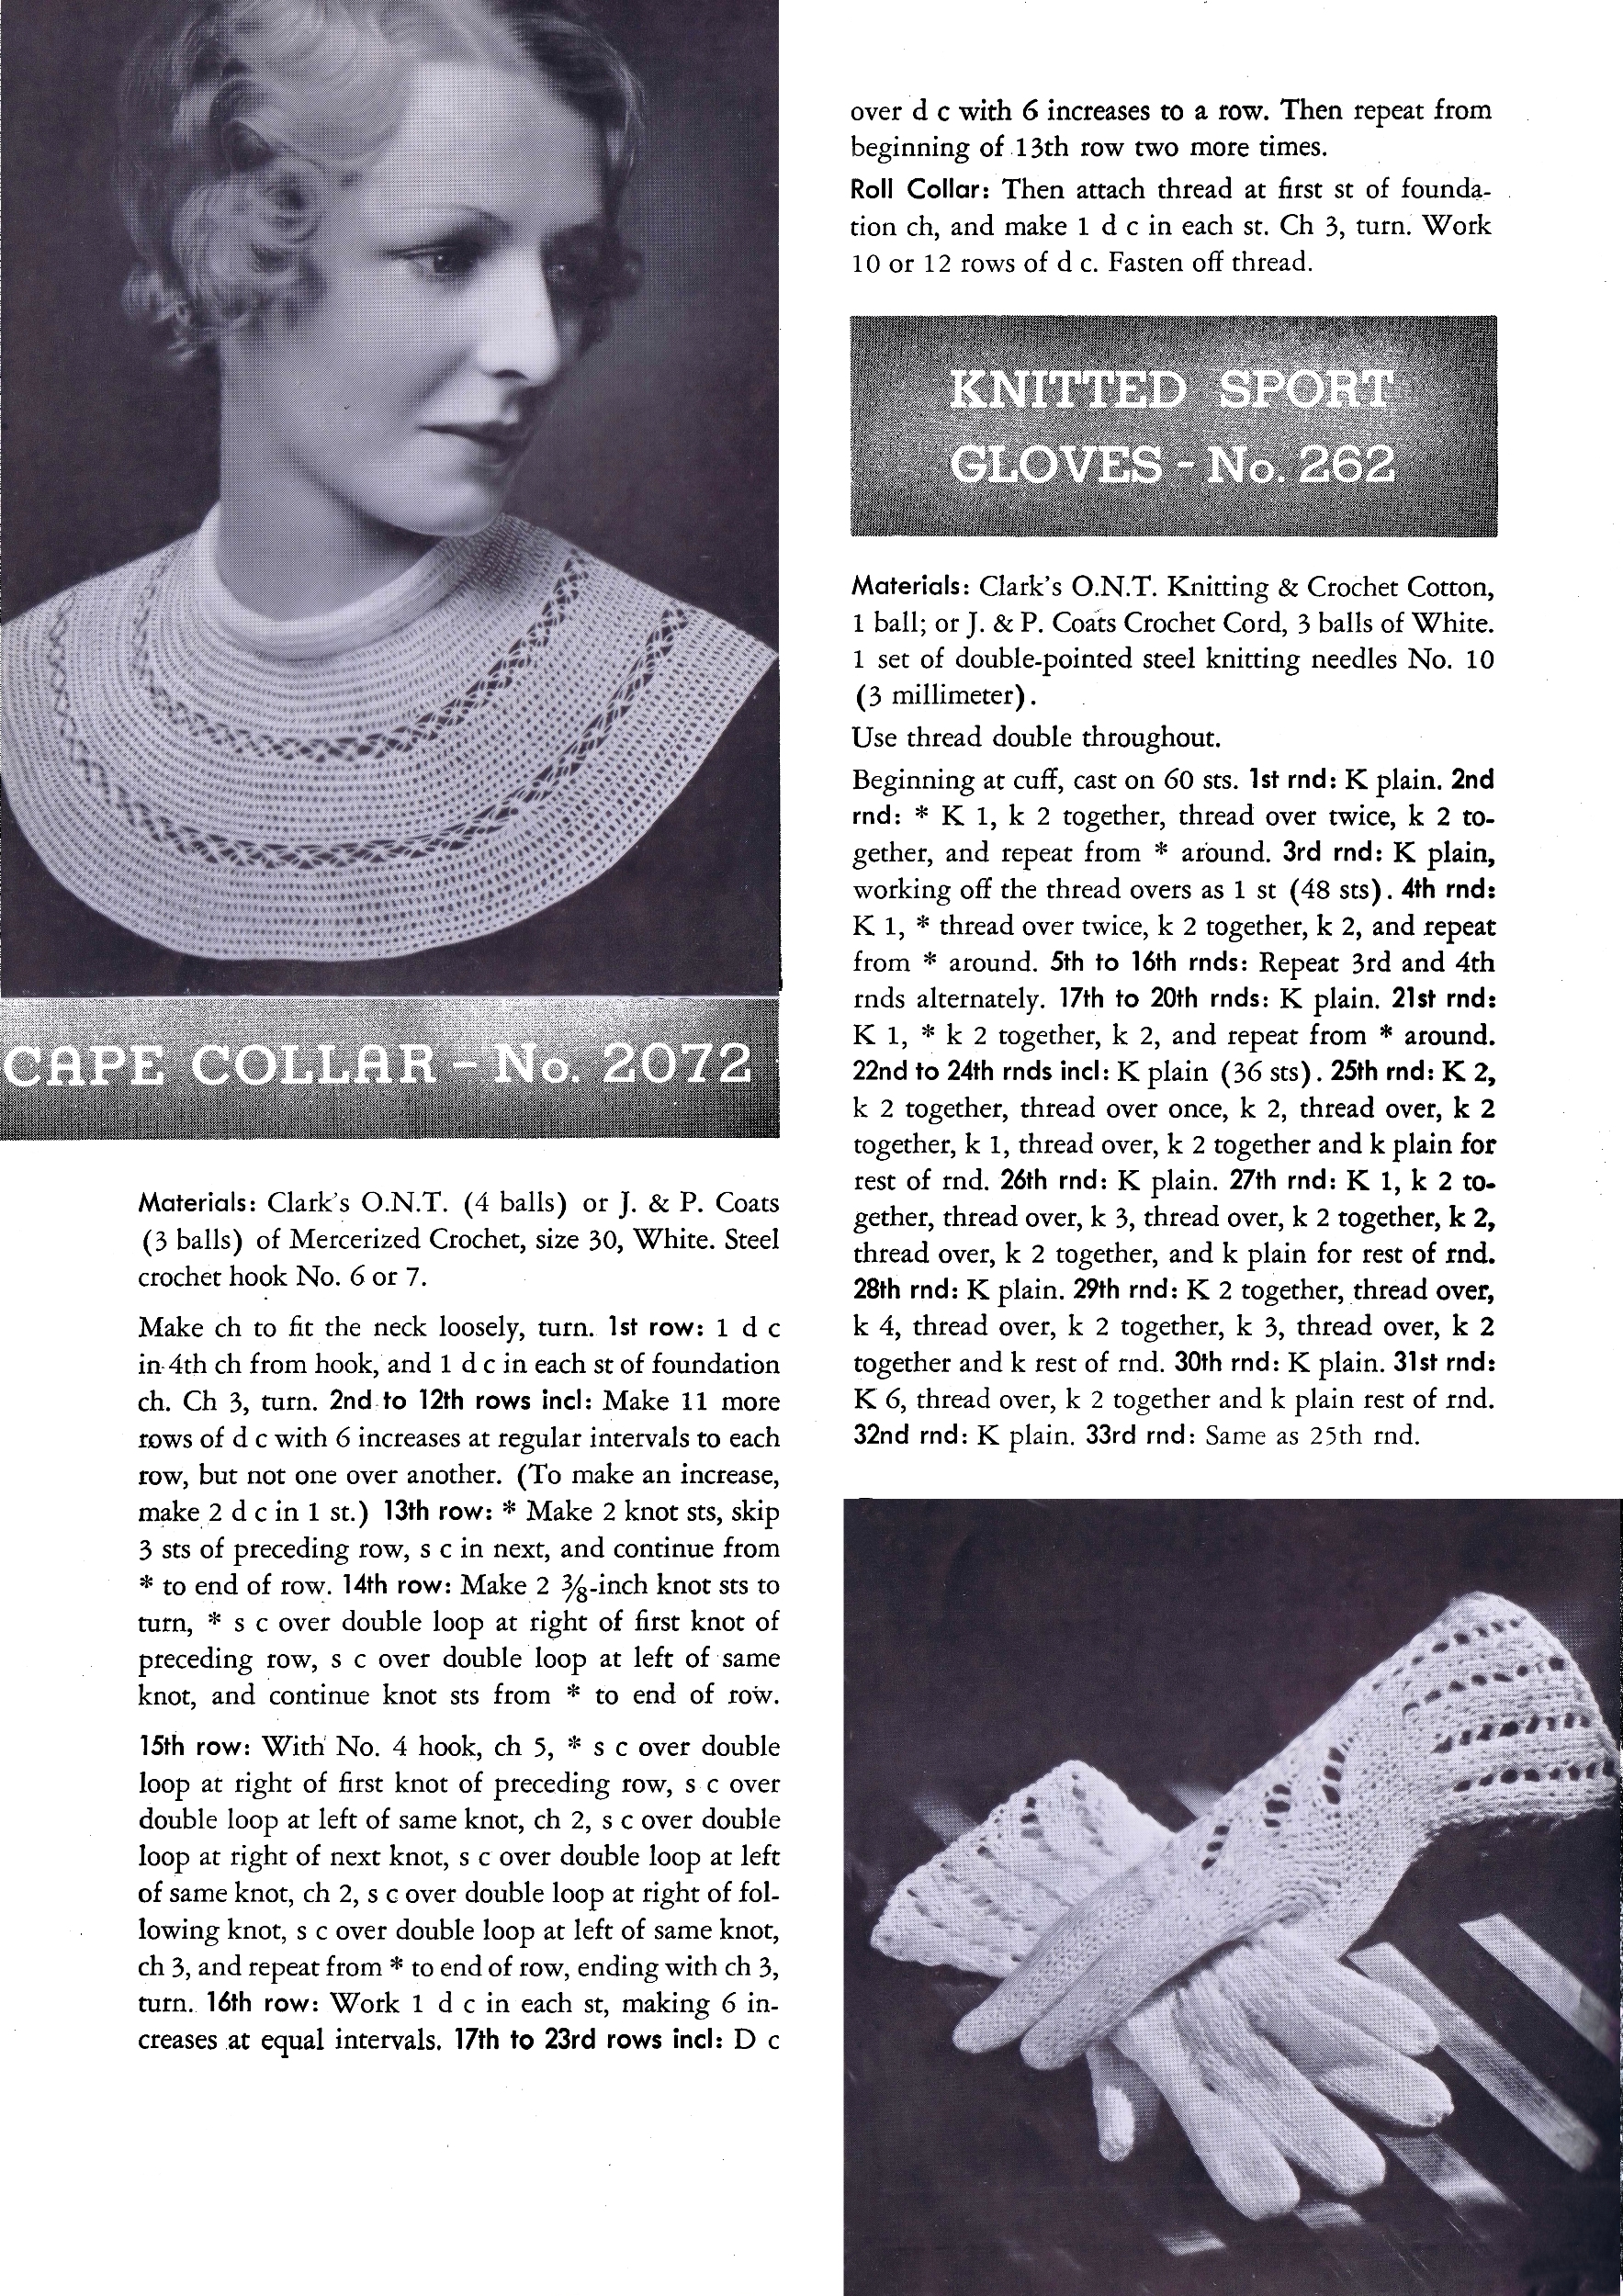 Knitted Gloves Cape Collar Selected Designs for Crochet